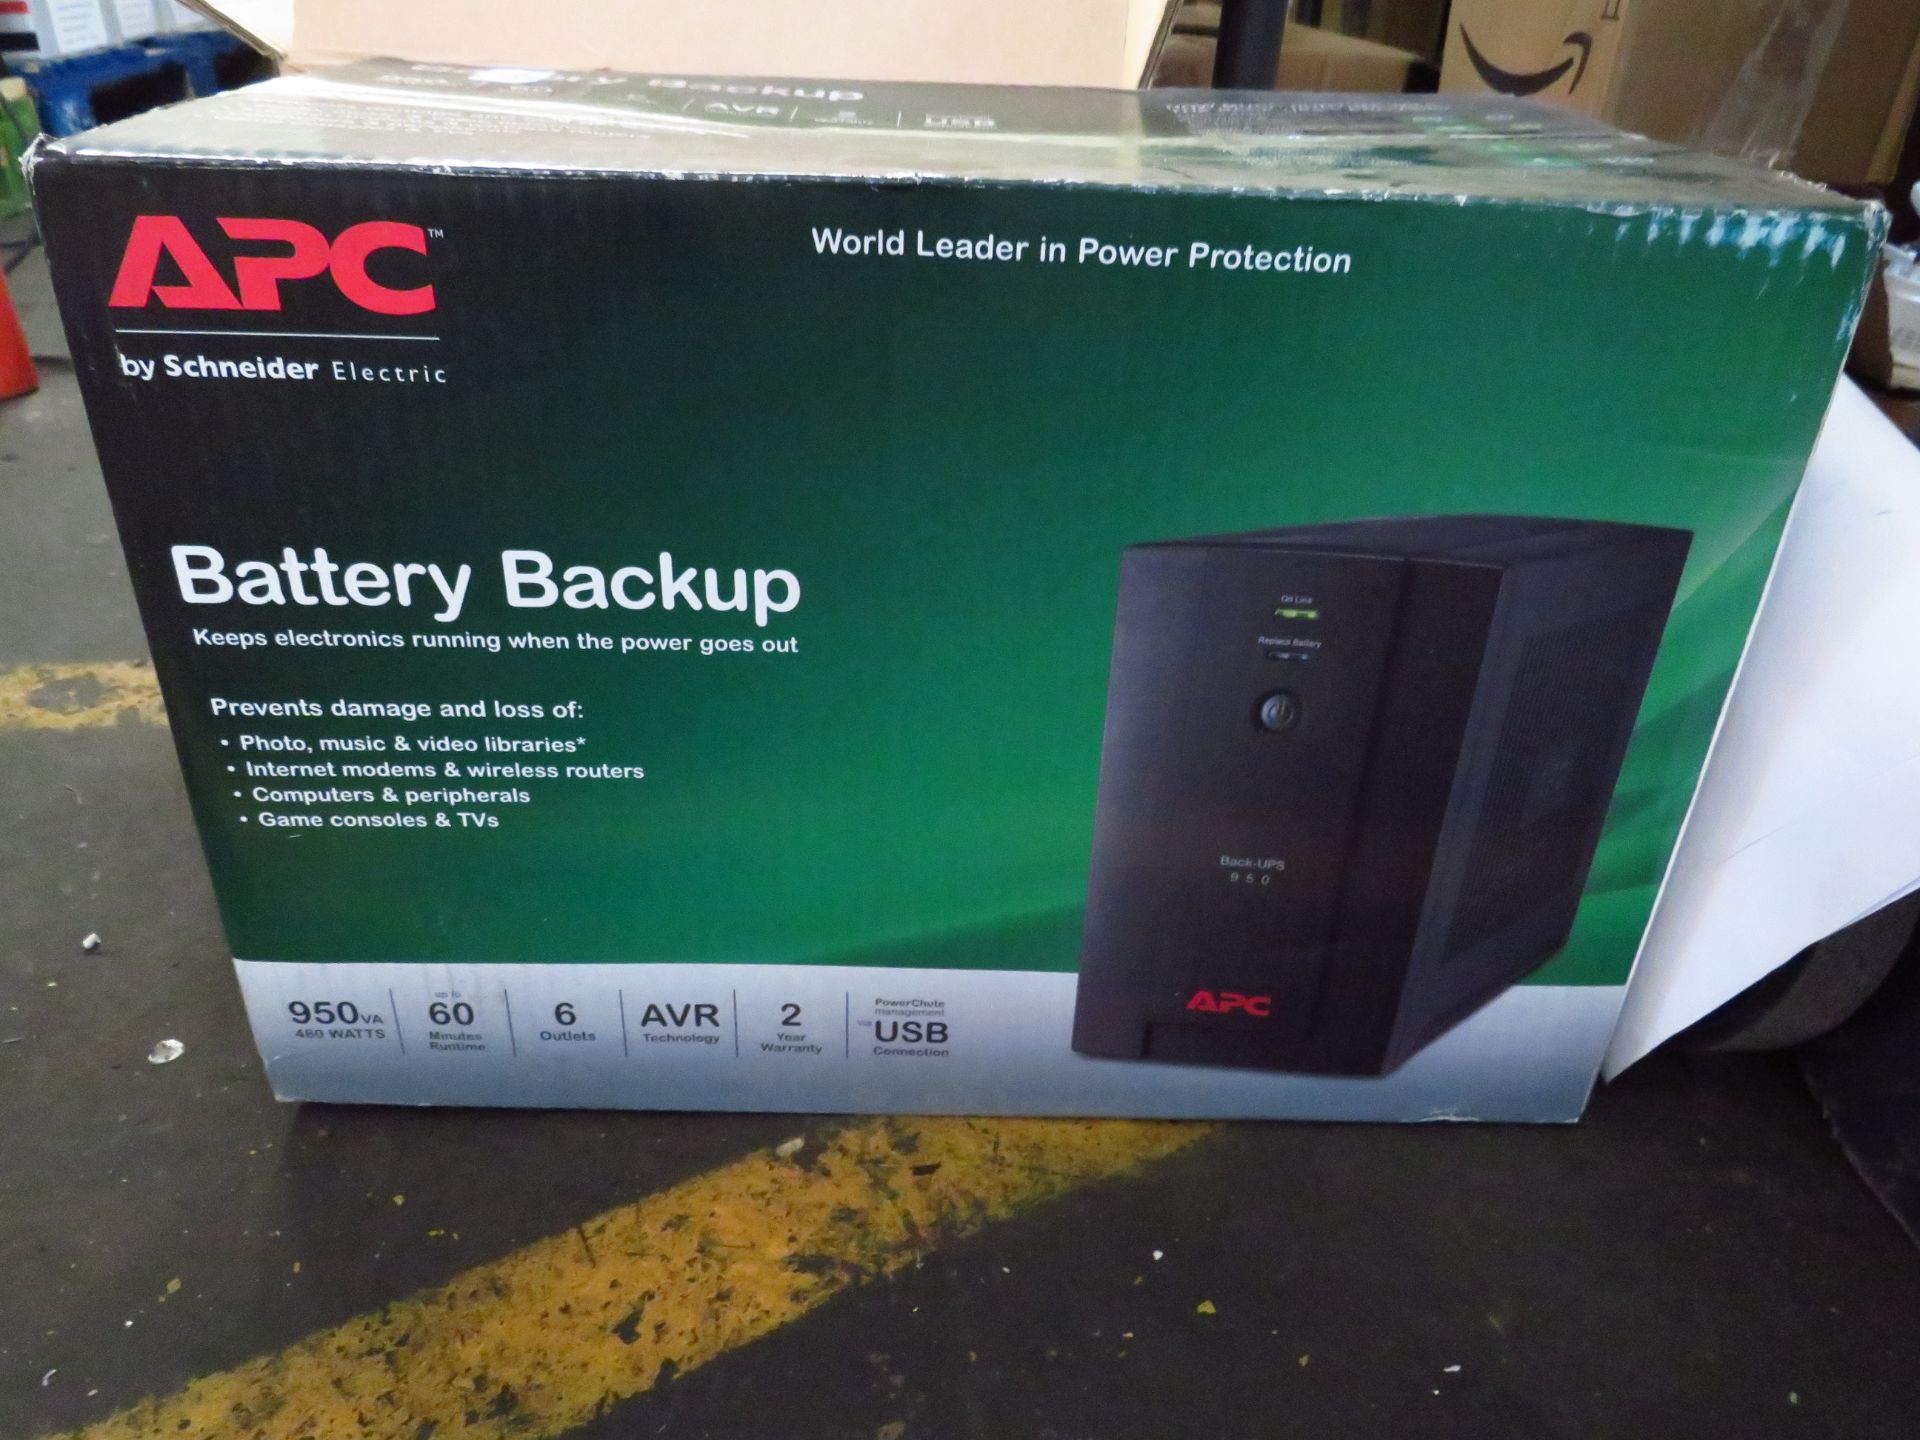 APC battery back up, boxed and unchecked